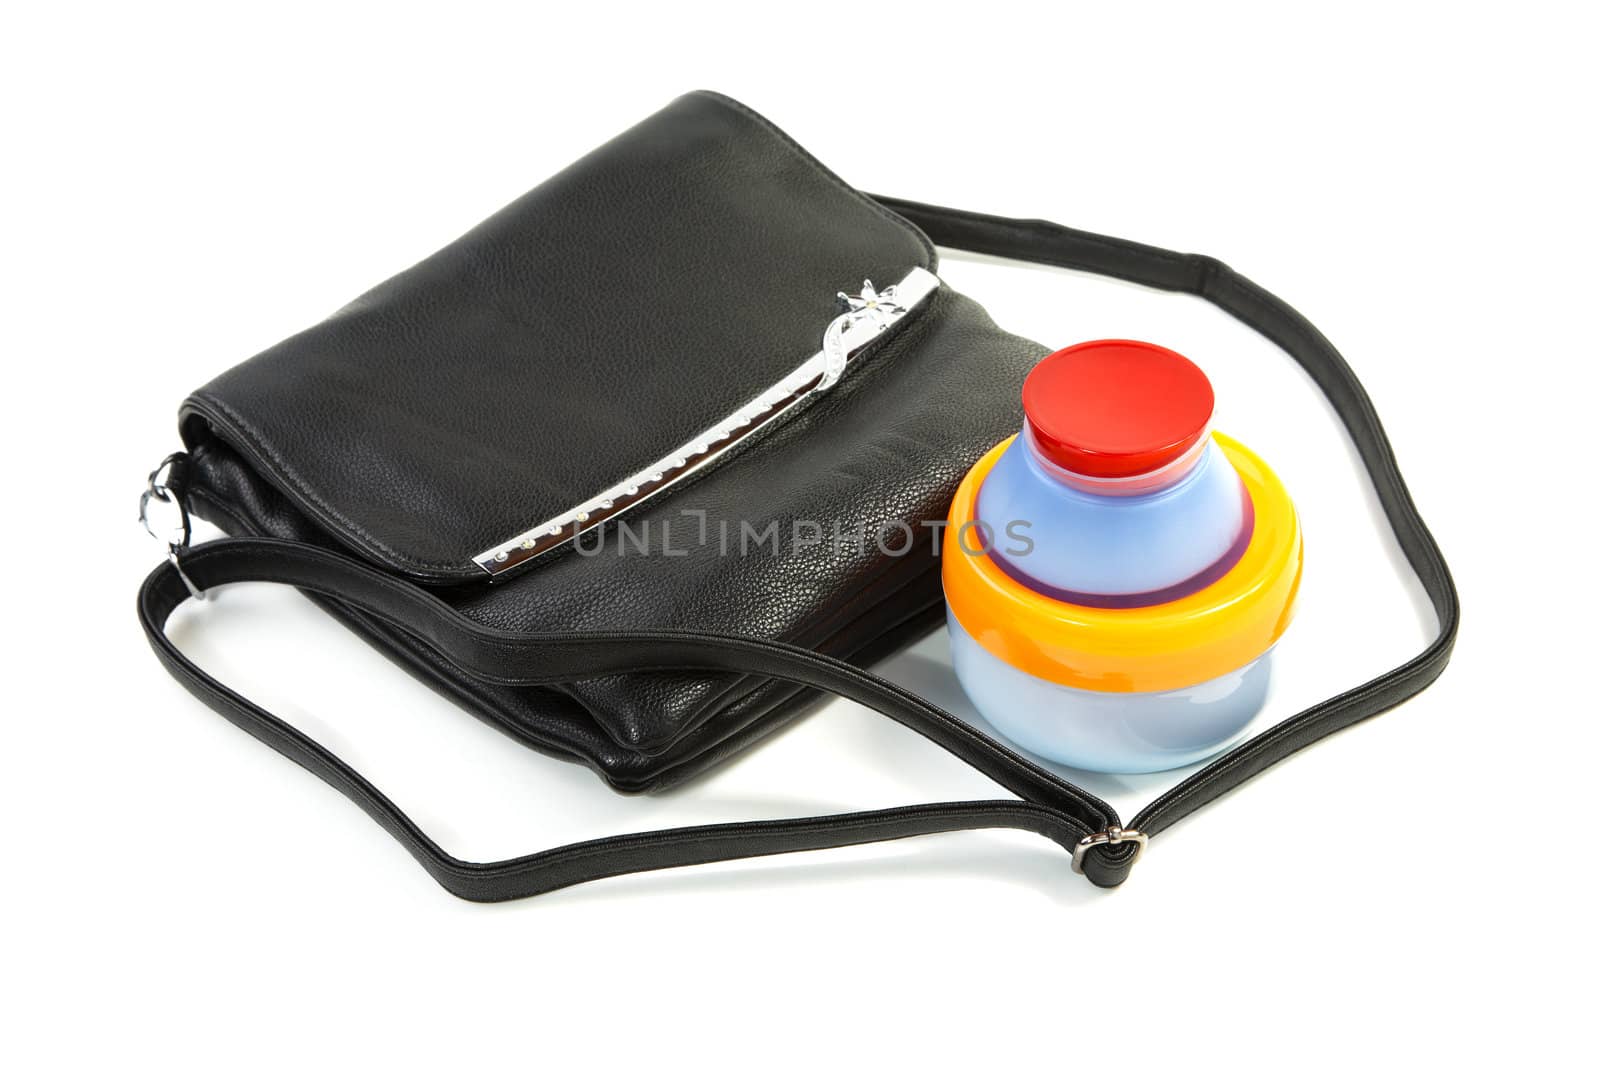 Female bag and cosmetics isolated on a white background